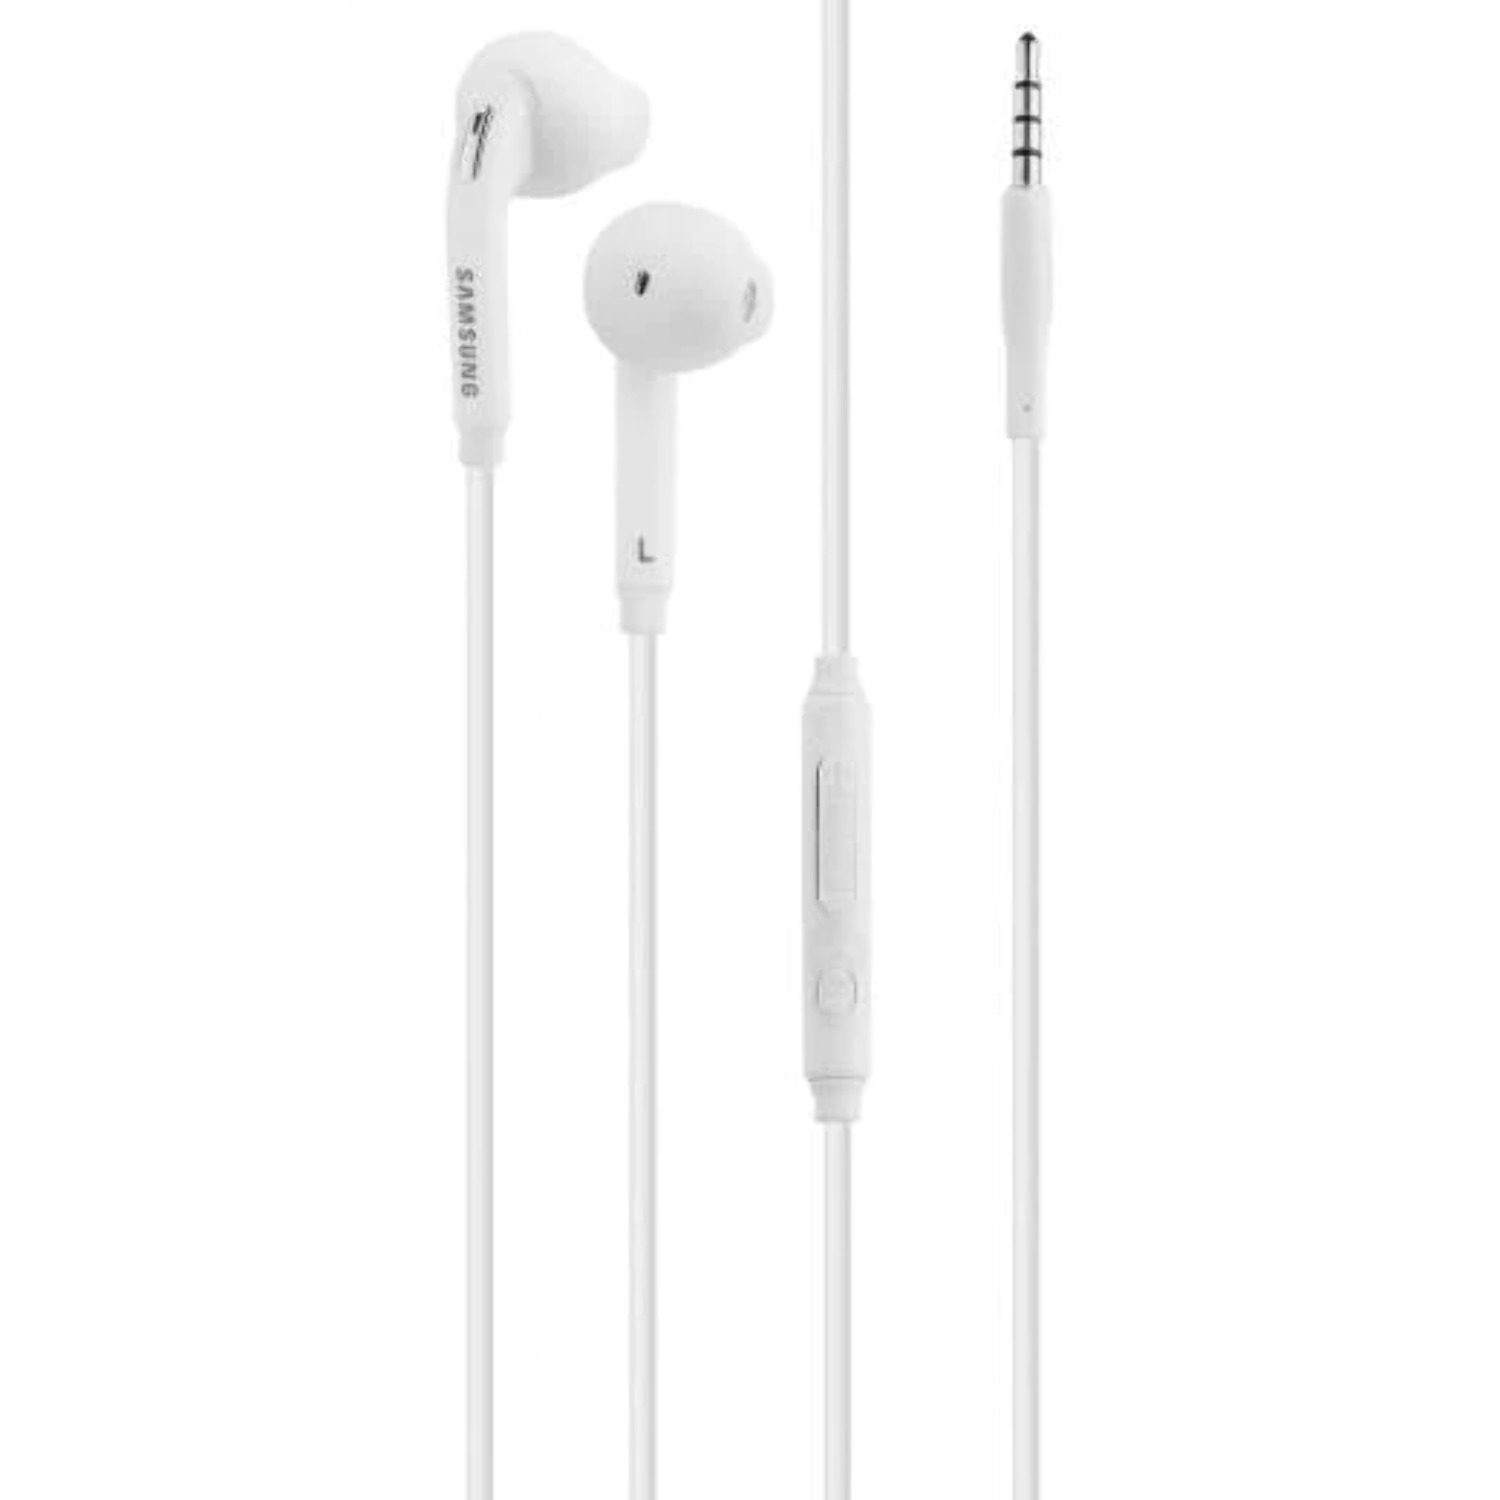 Premium Wired Headset 3.5mm Earbud Stereo In-Ear Headphones with in-line Remote & Microphone Compatible with Nokia 3310 (2017) - image 1 of 1